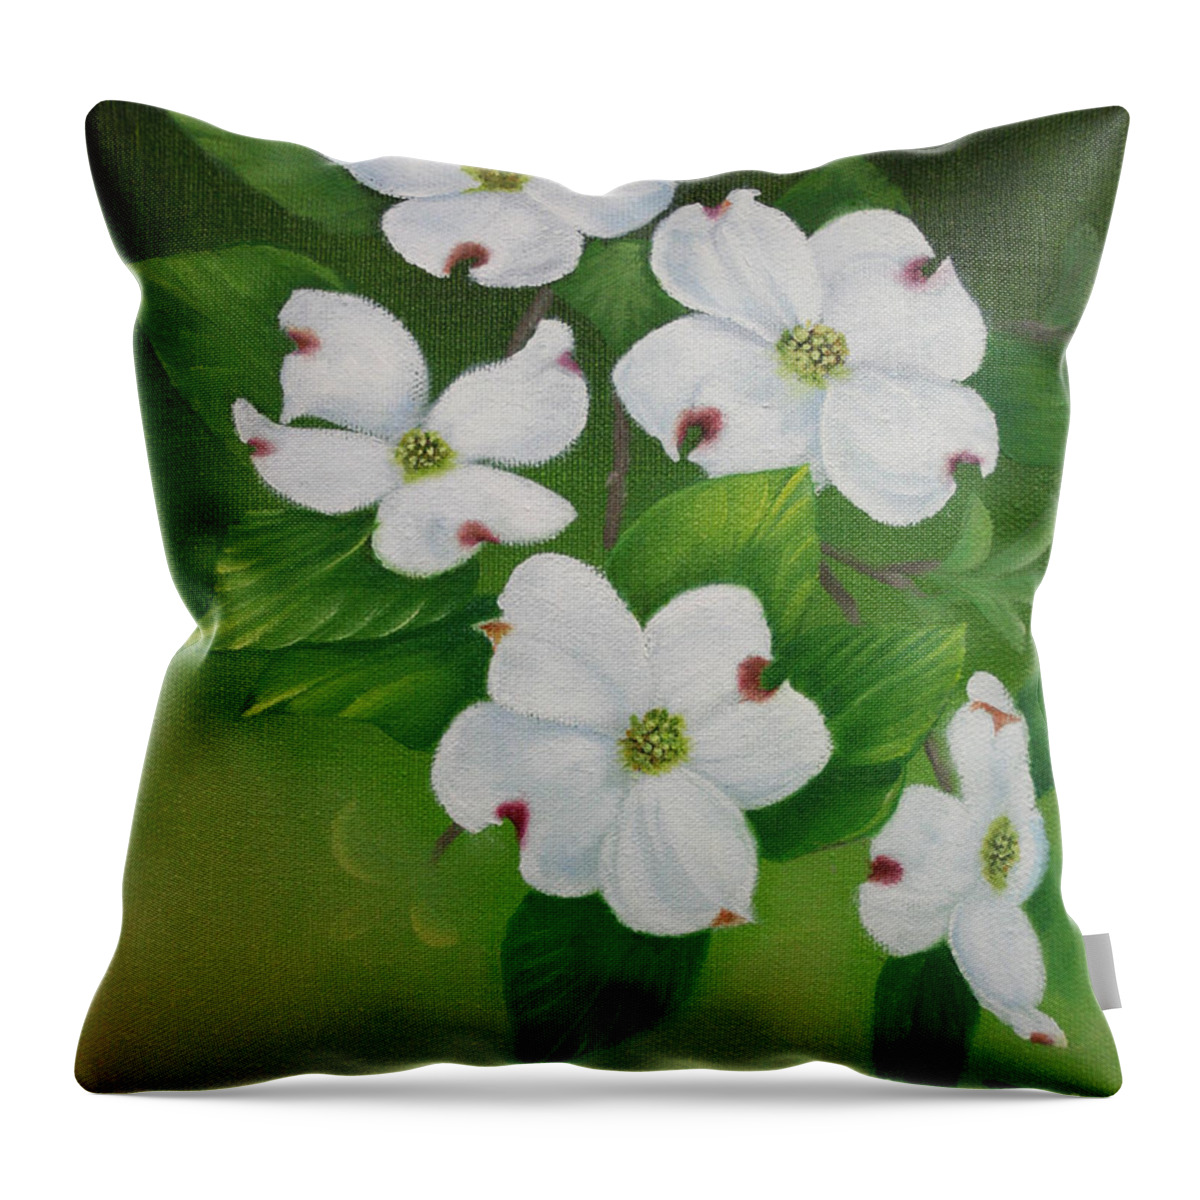 Dogwoods Throw Pillow featuring the painting White Dogwoods by Jimmie Bartlett